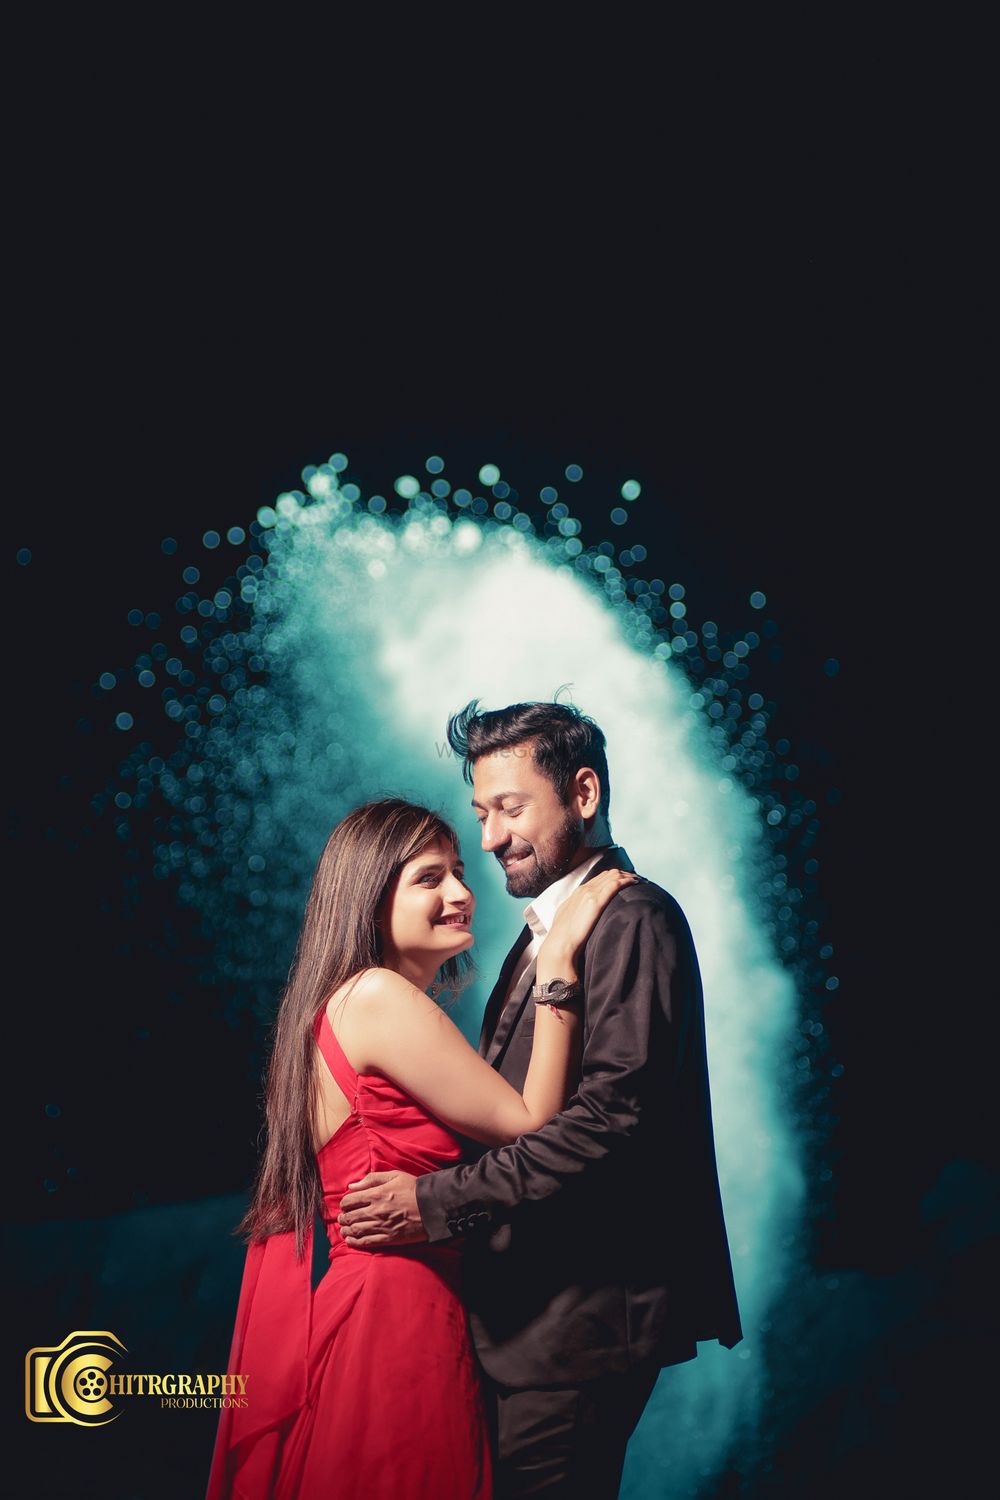 Photo From Nikhil and Srishty - By Chitrgraphy Productions